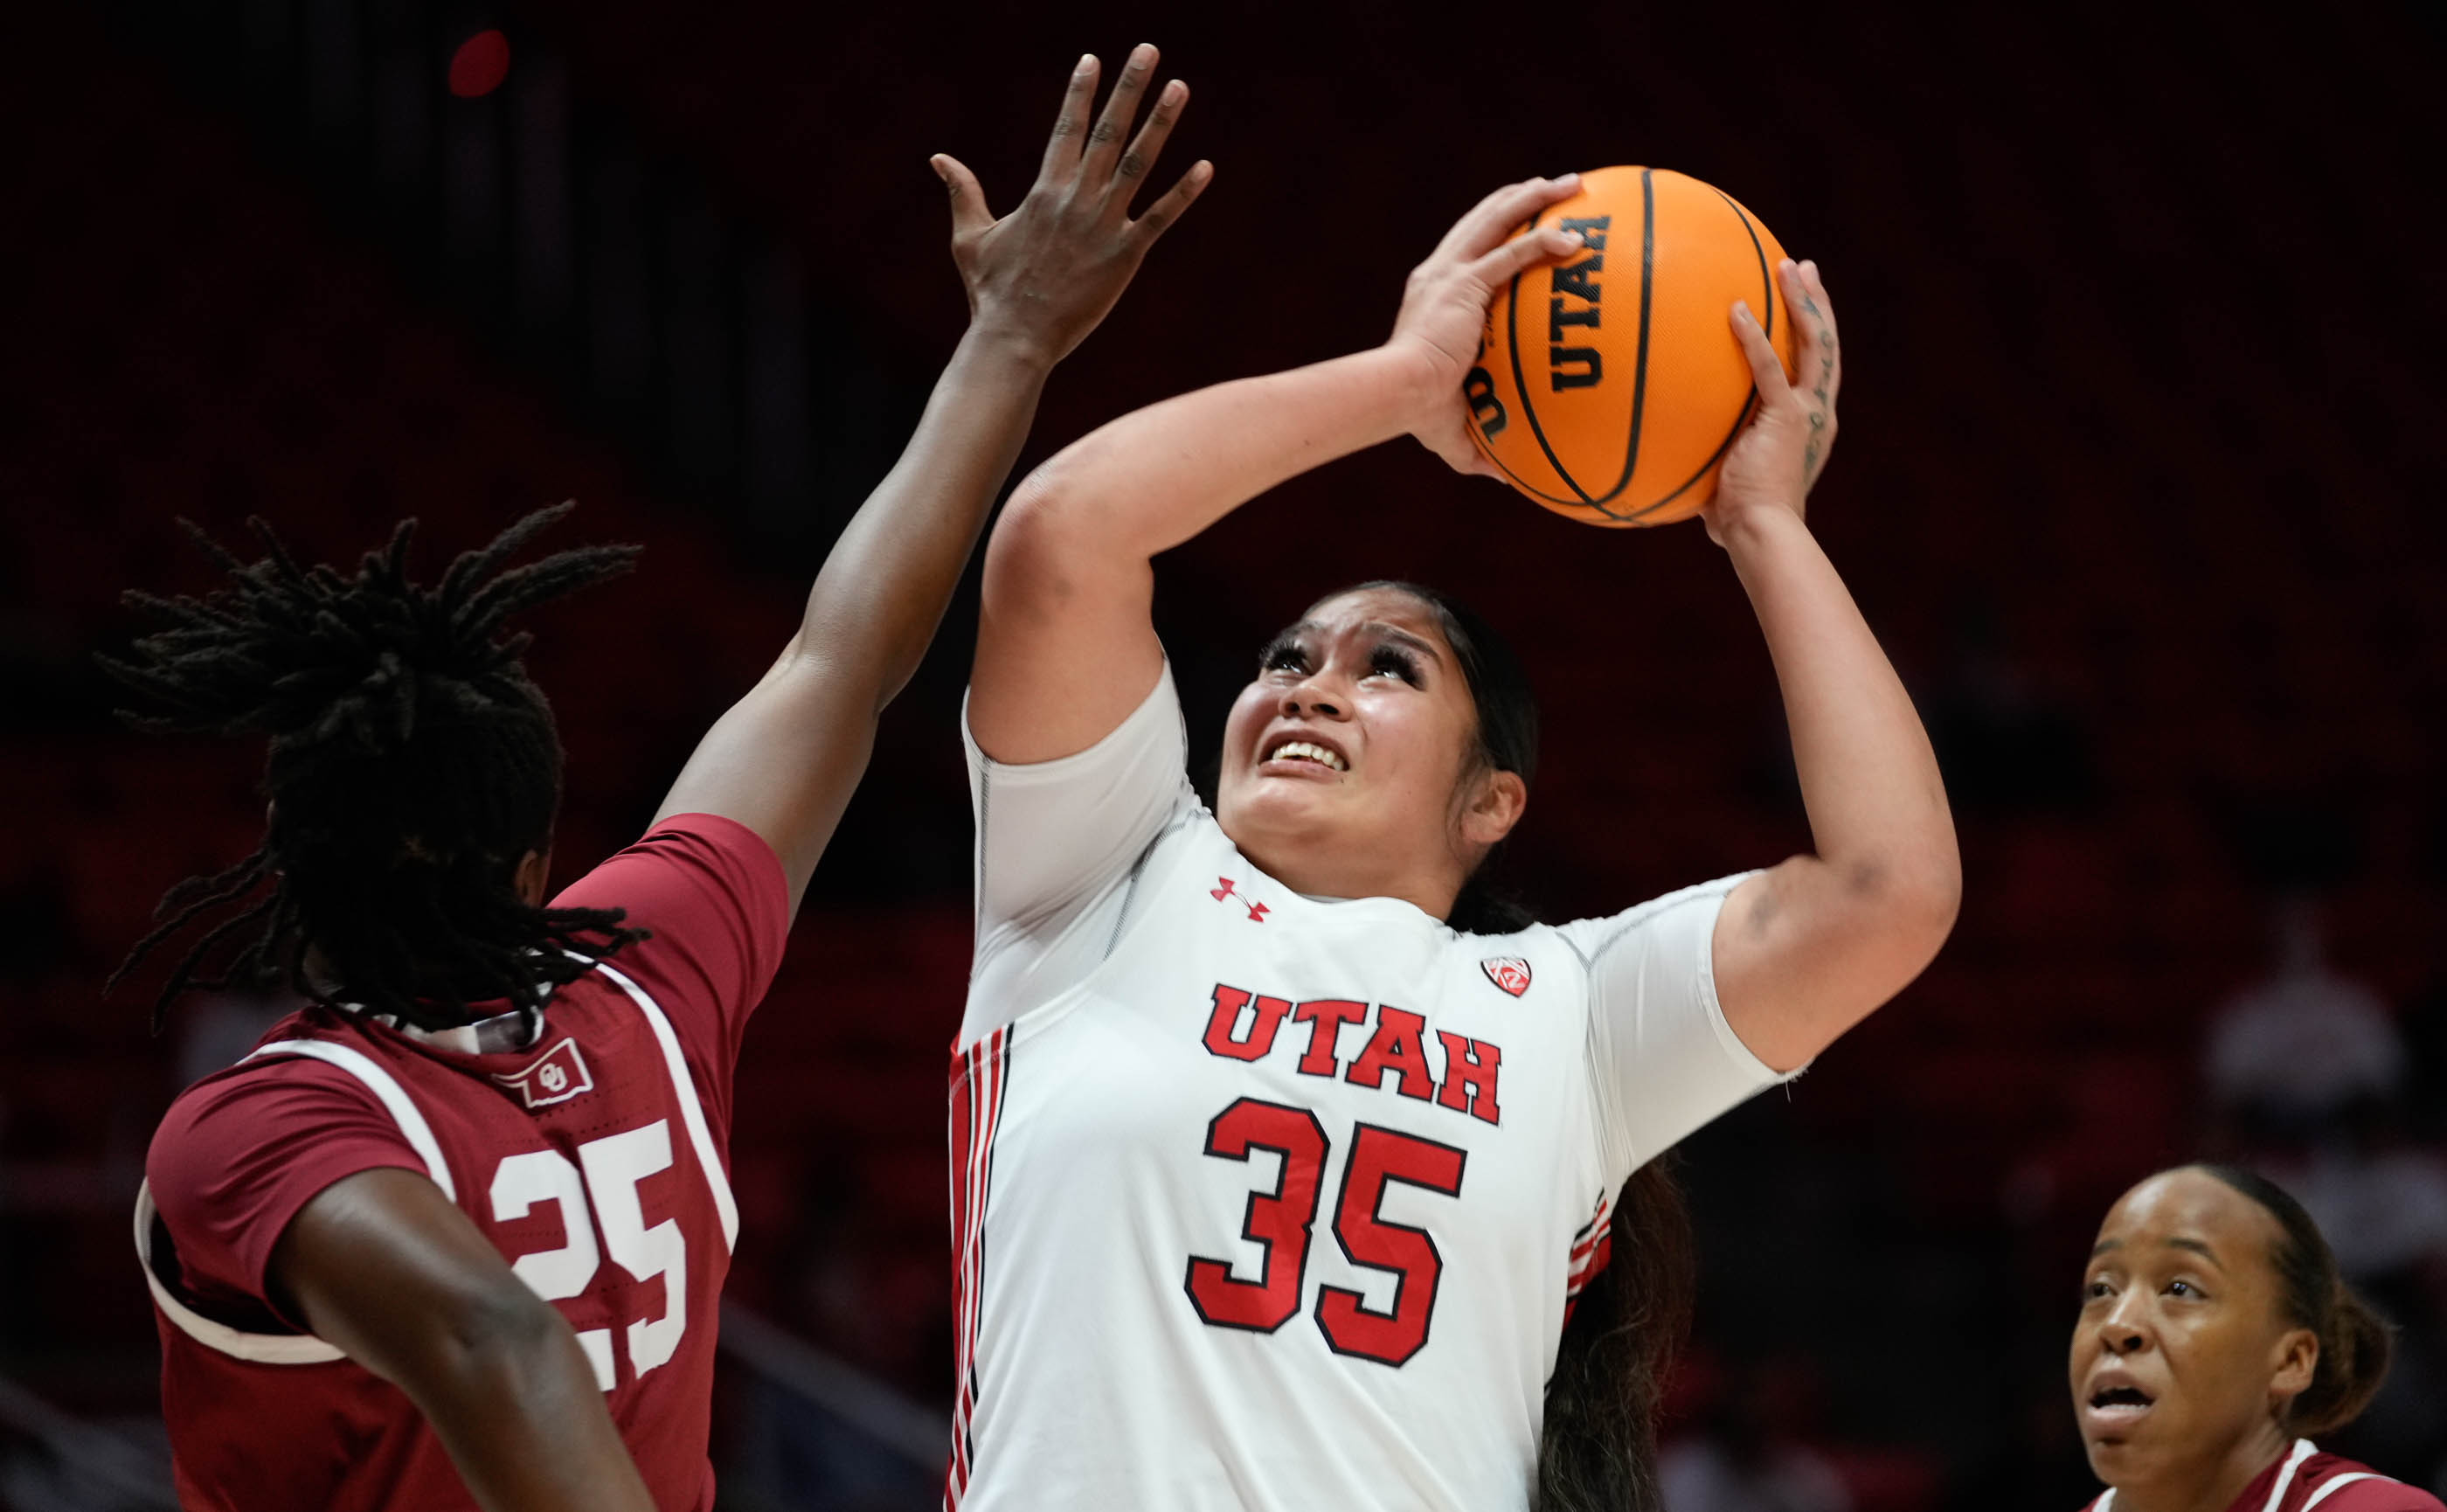 No. 25 Utah women's basketball team makes a statement to the